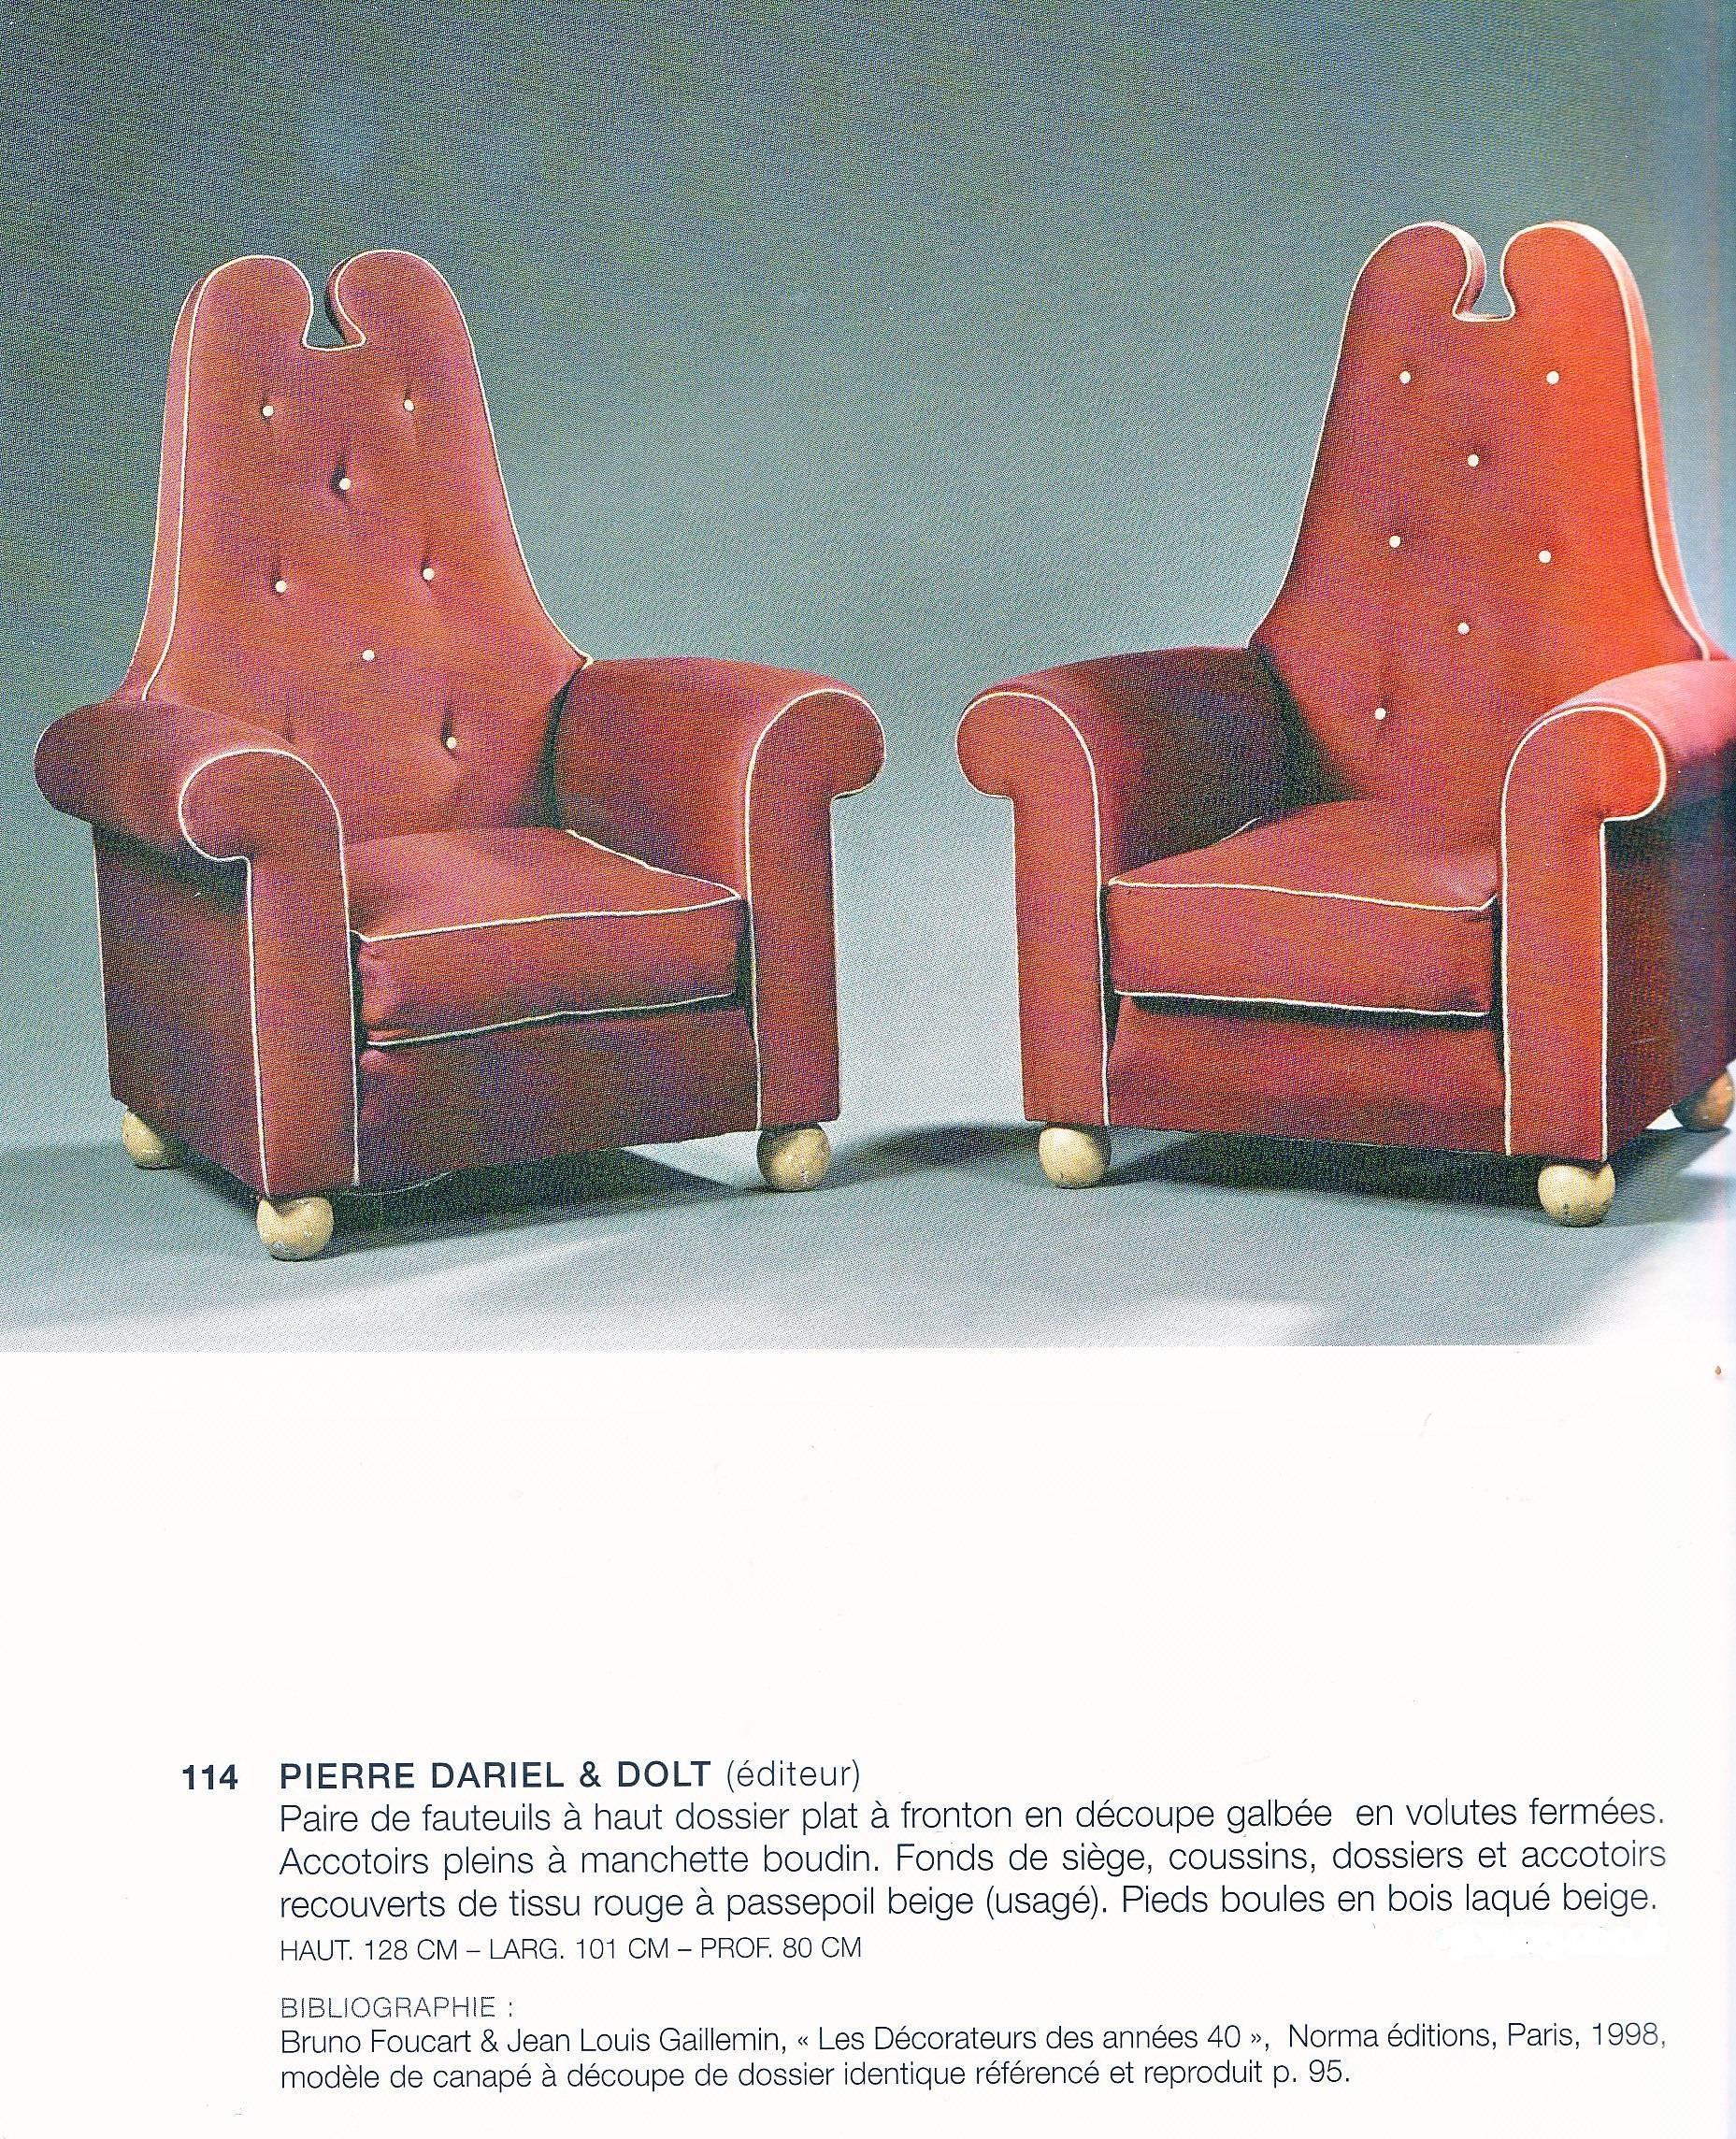 Pair of Leather and Lacquer Armchairs by Dolt, 1935-1940 3